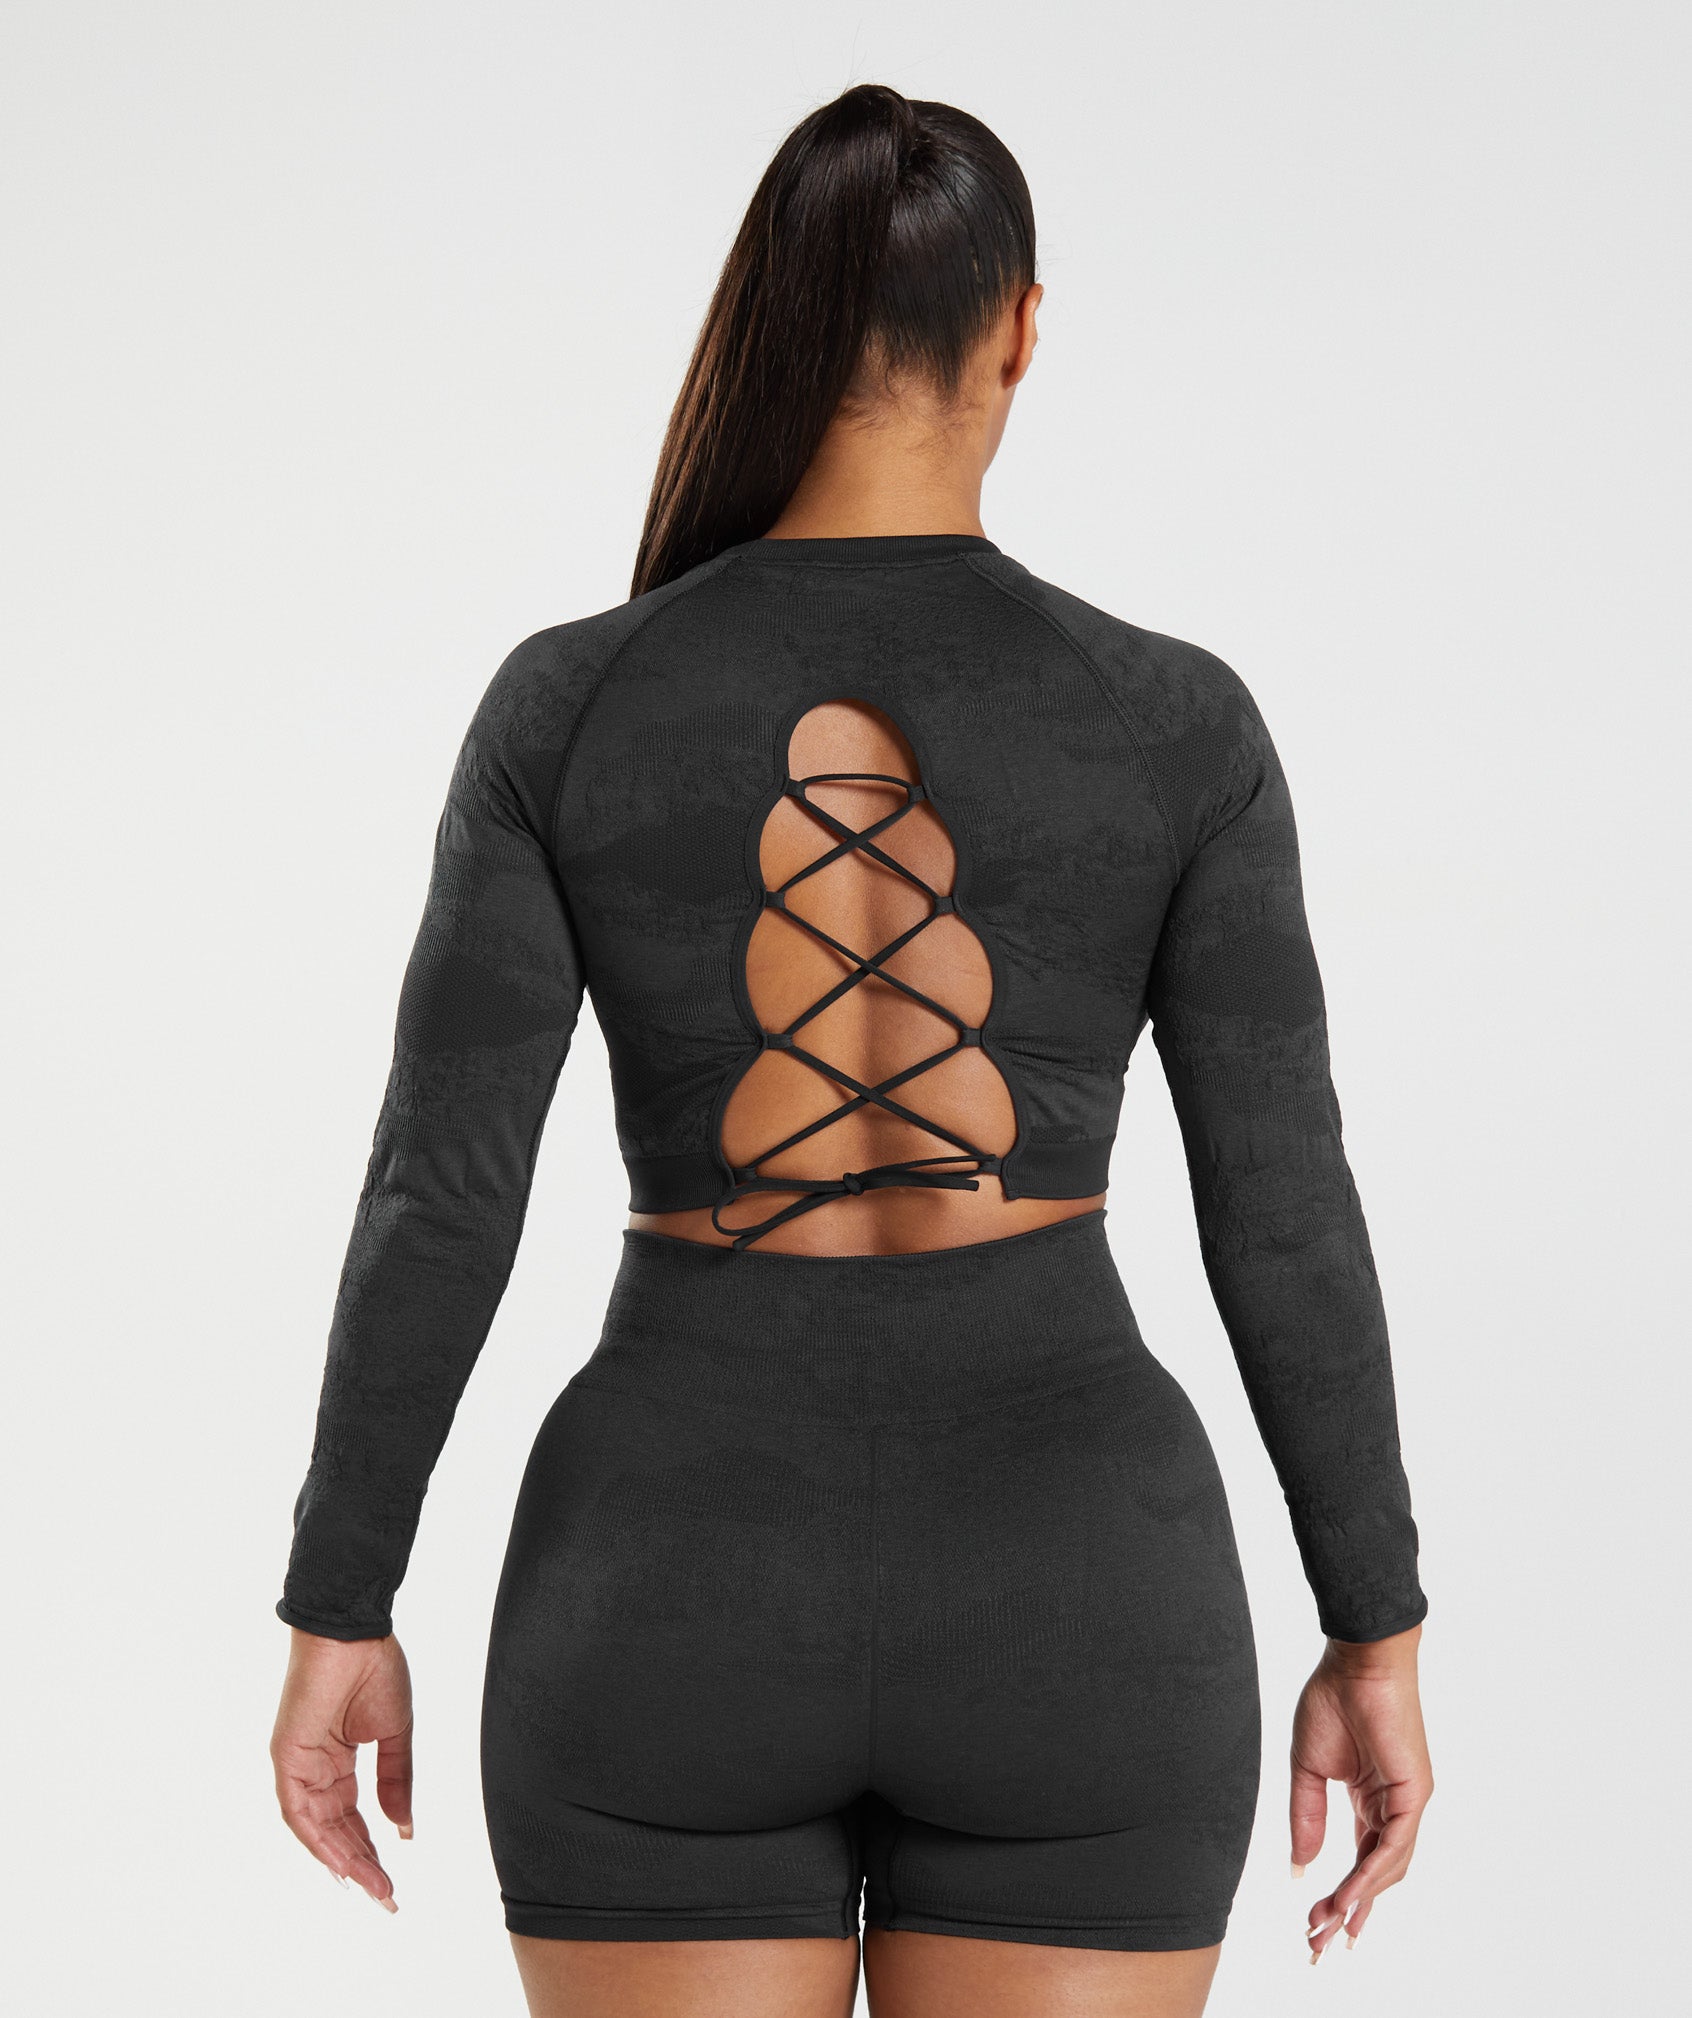 Adapt Camo Seamless Lace Up Back Top in Black/Onyx Grey